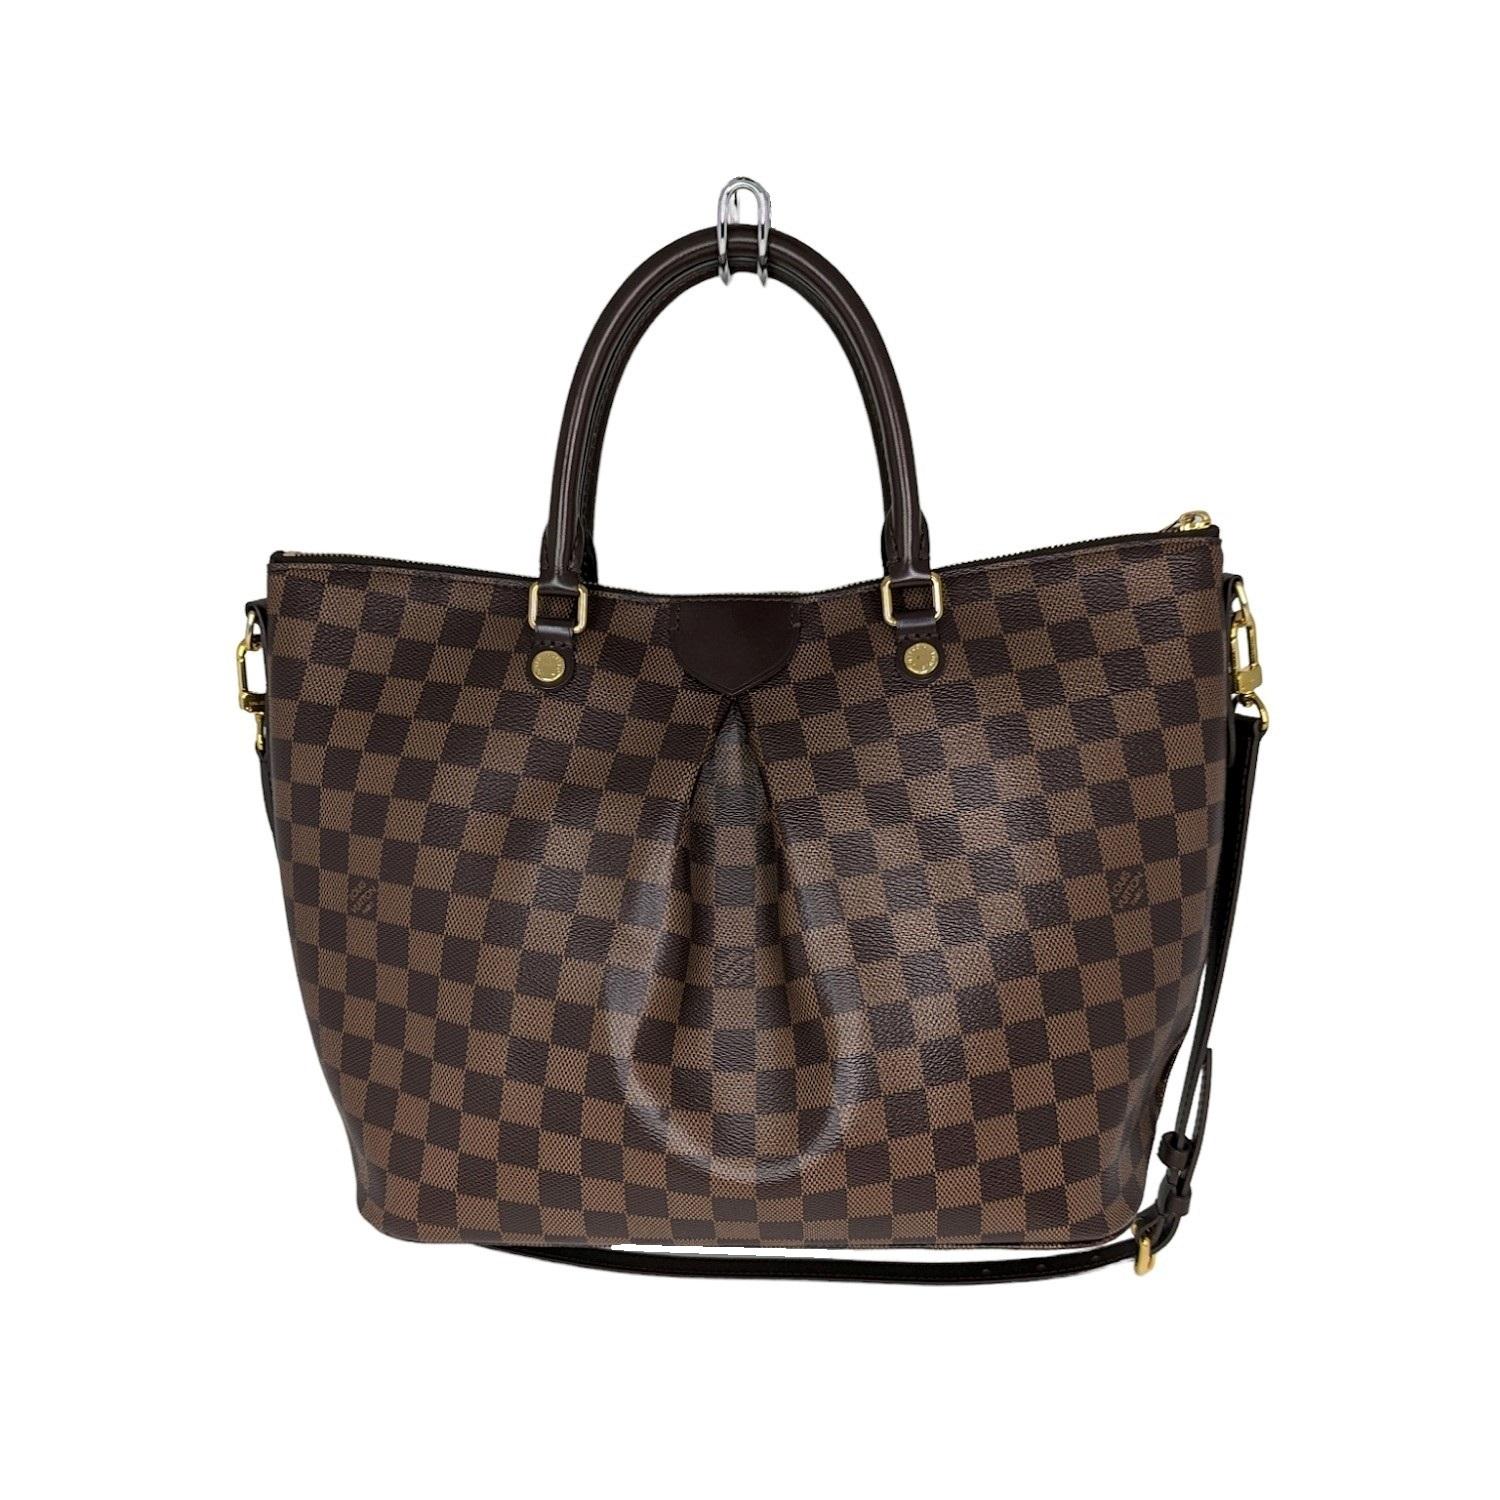 This stylish tote is crafted of Louis Vuitton Damier check canvas in ebene brown. The bag has a prominent pleat at the mid-center with rolled leather top handles and an ebene leather cross-body shoulder strap; all detailed with polished gold